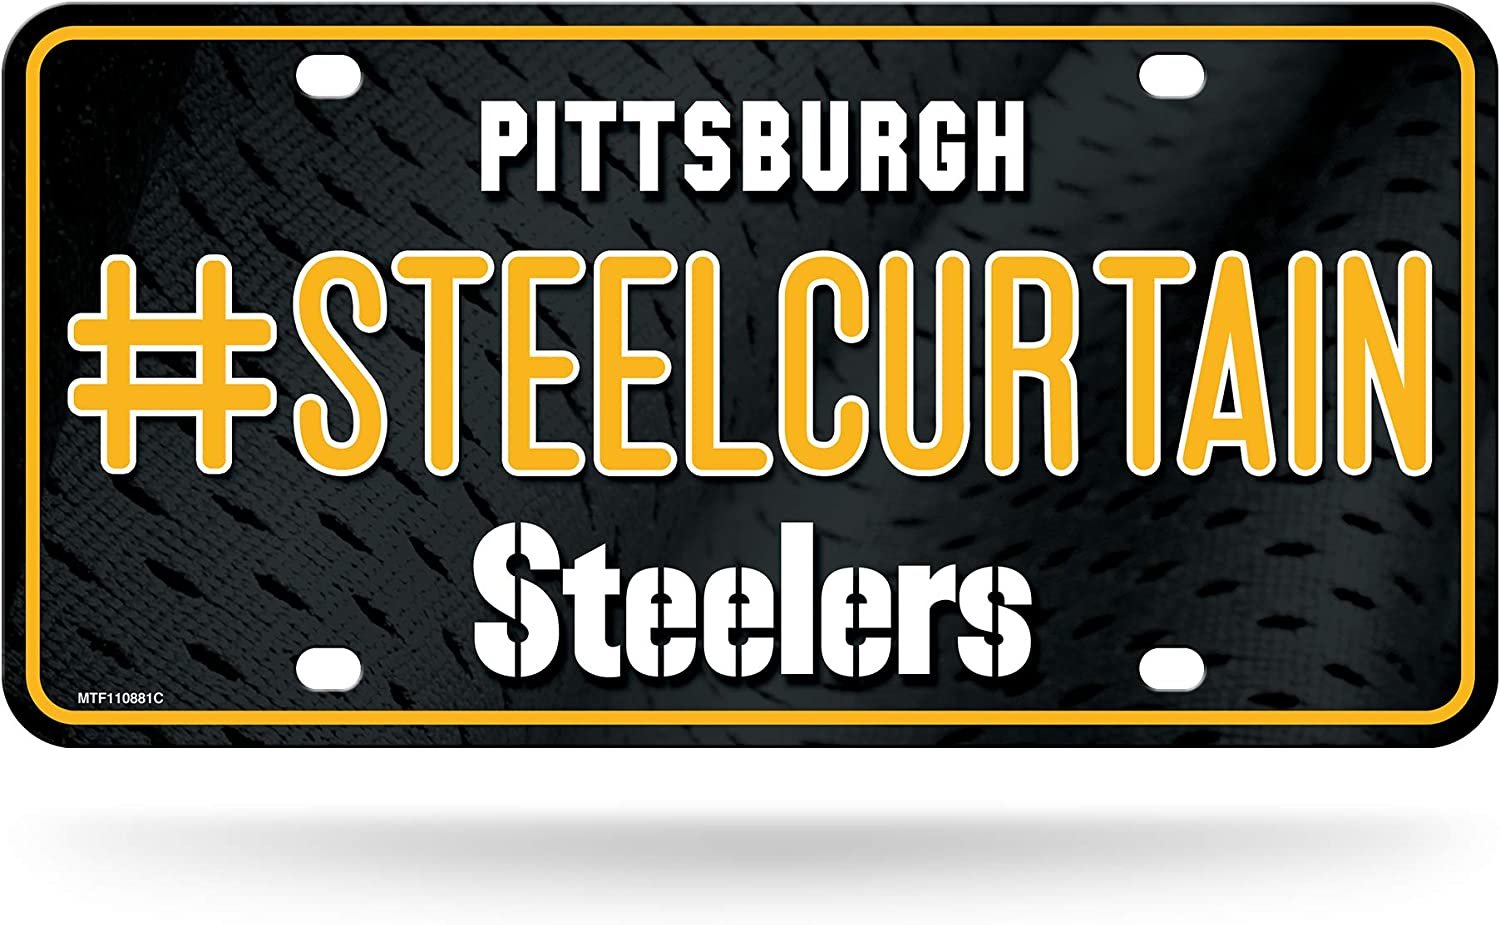 Pittsburgh Steelers Metal Auto Tag License Plate, Steel Curtain Design, 12x6 Inch